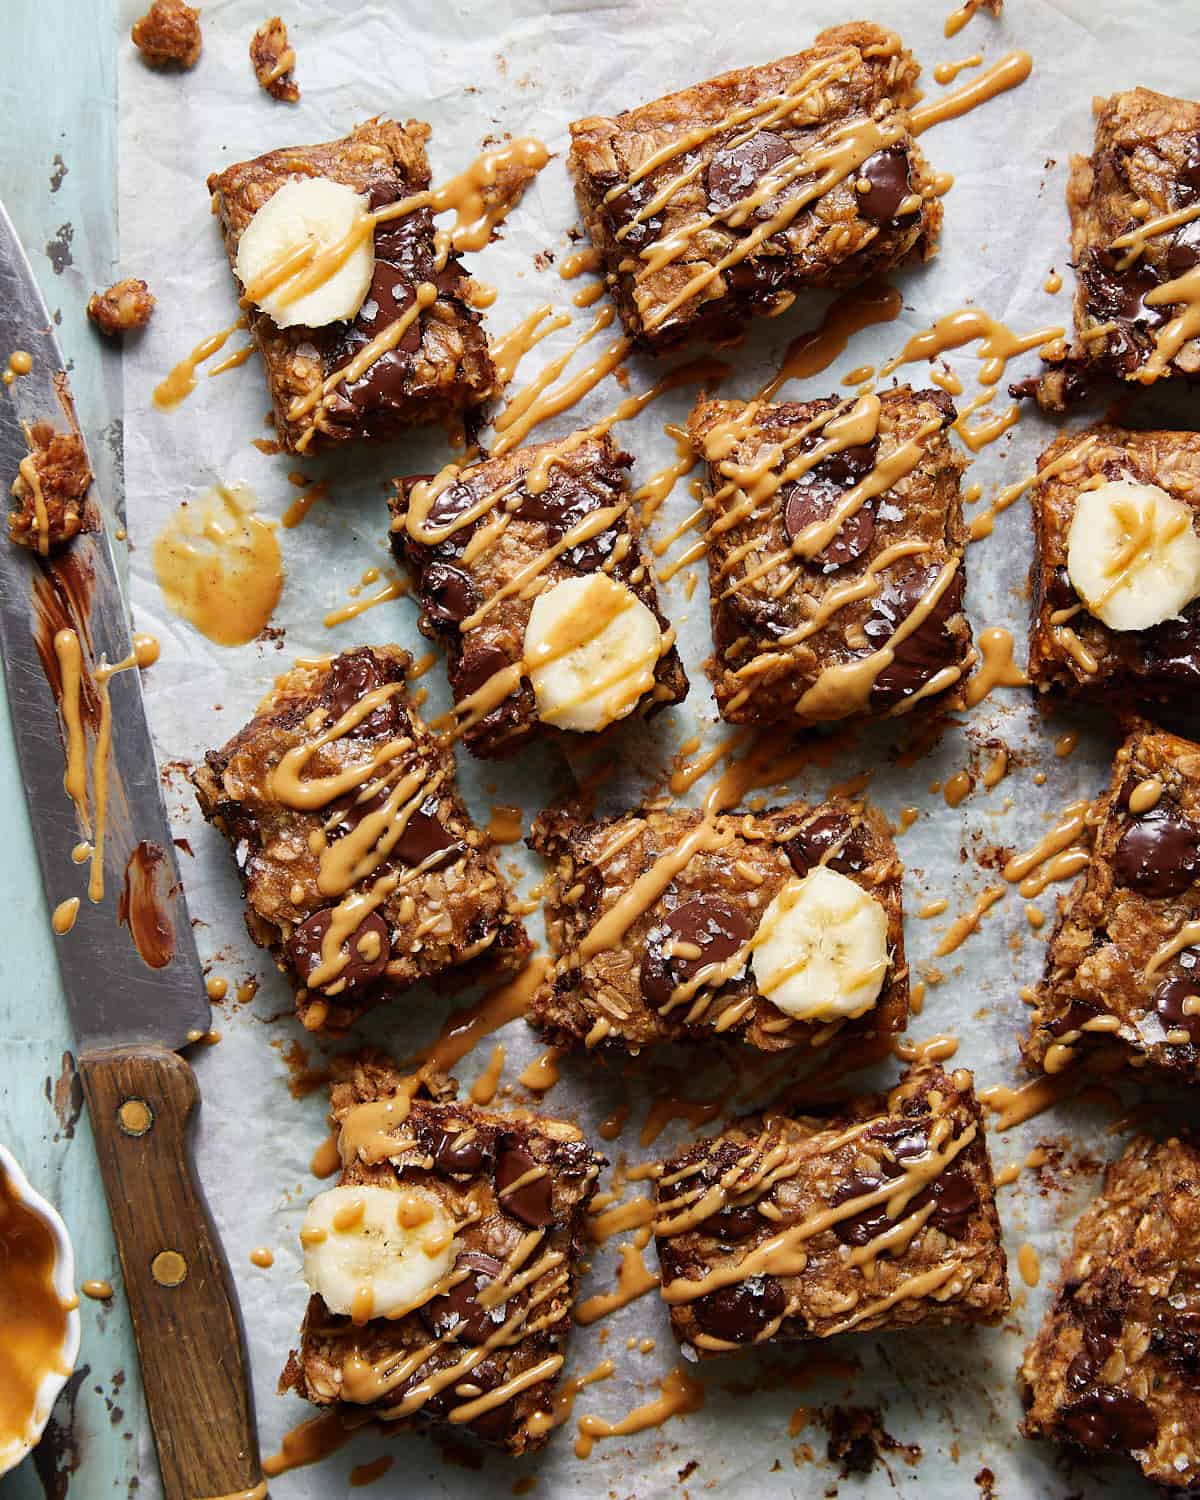 Peanut butter banana bars on parchment paper.